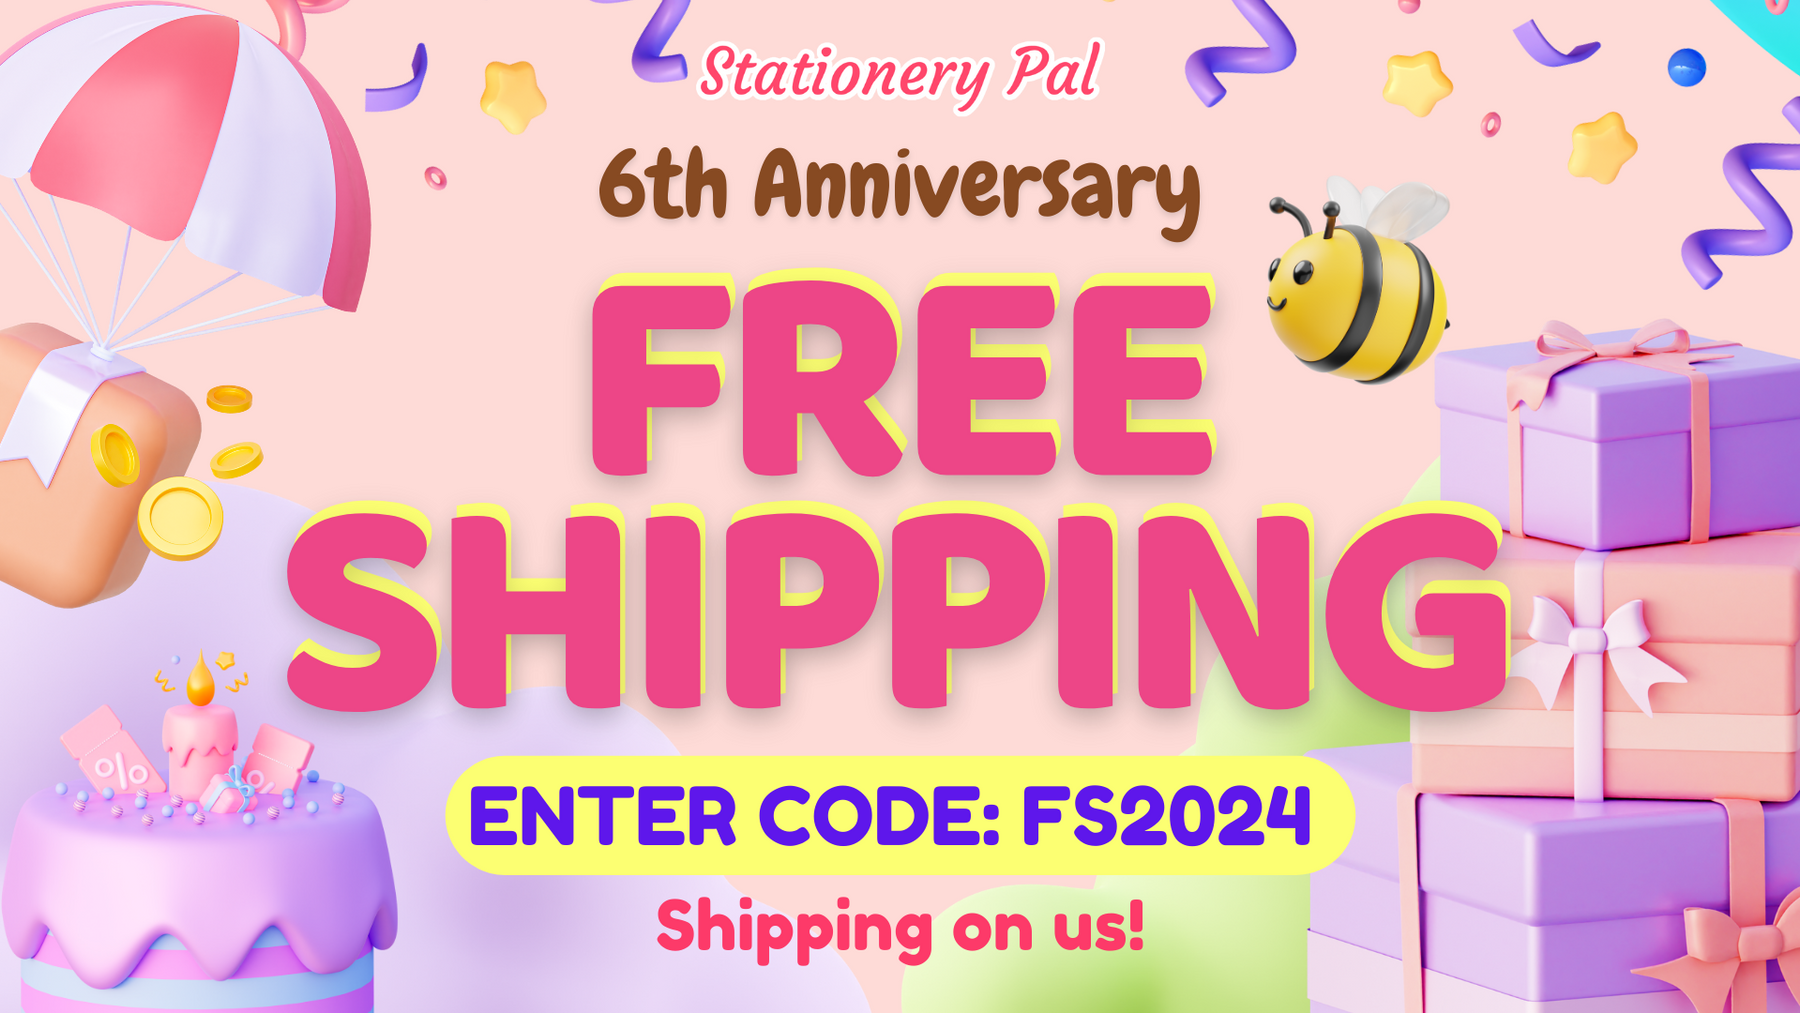 💗Join our Celebration and Party with Free Shipping!💗